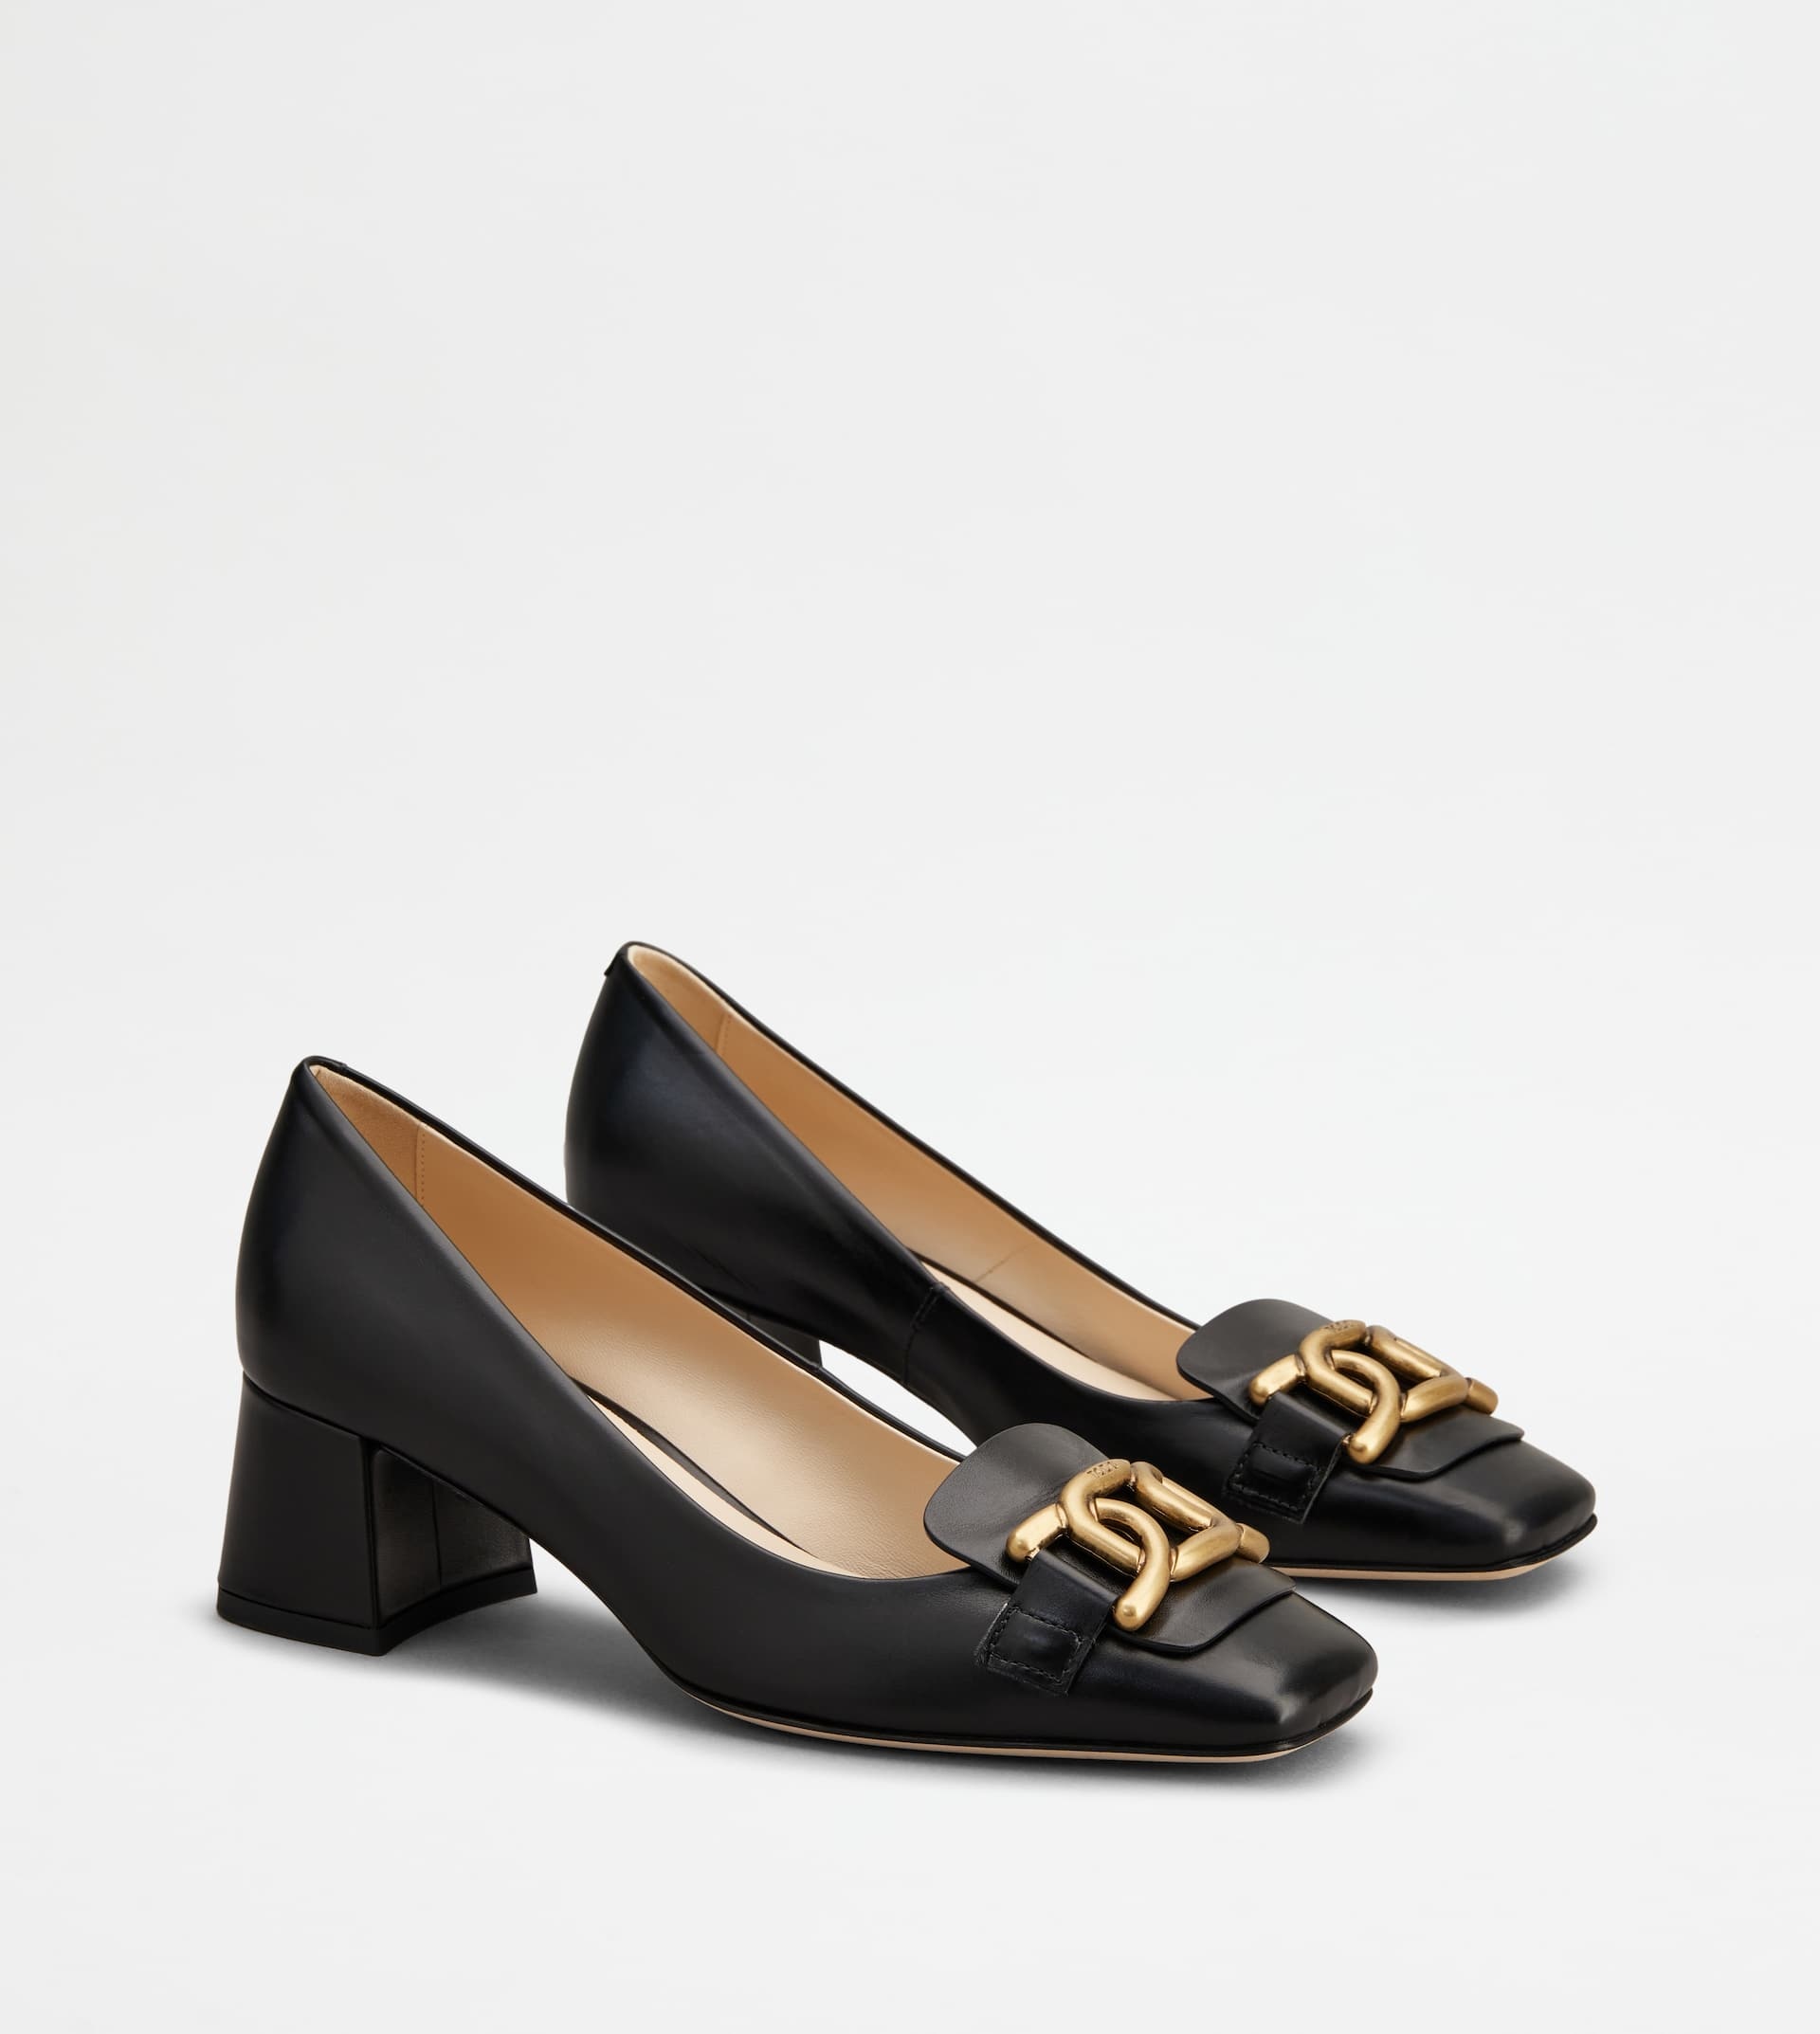 KATE PUMPS IN LEATHER - BLACK - 3